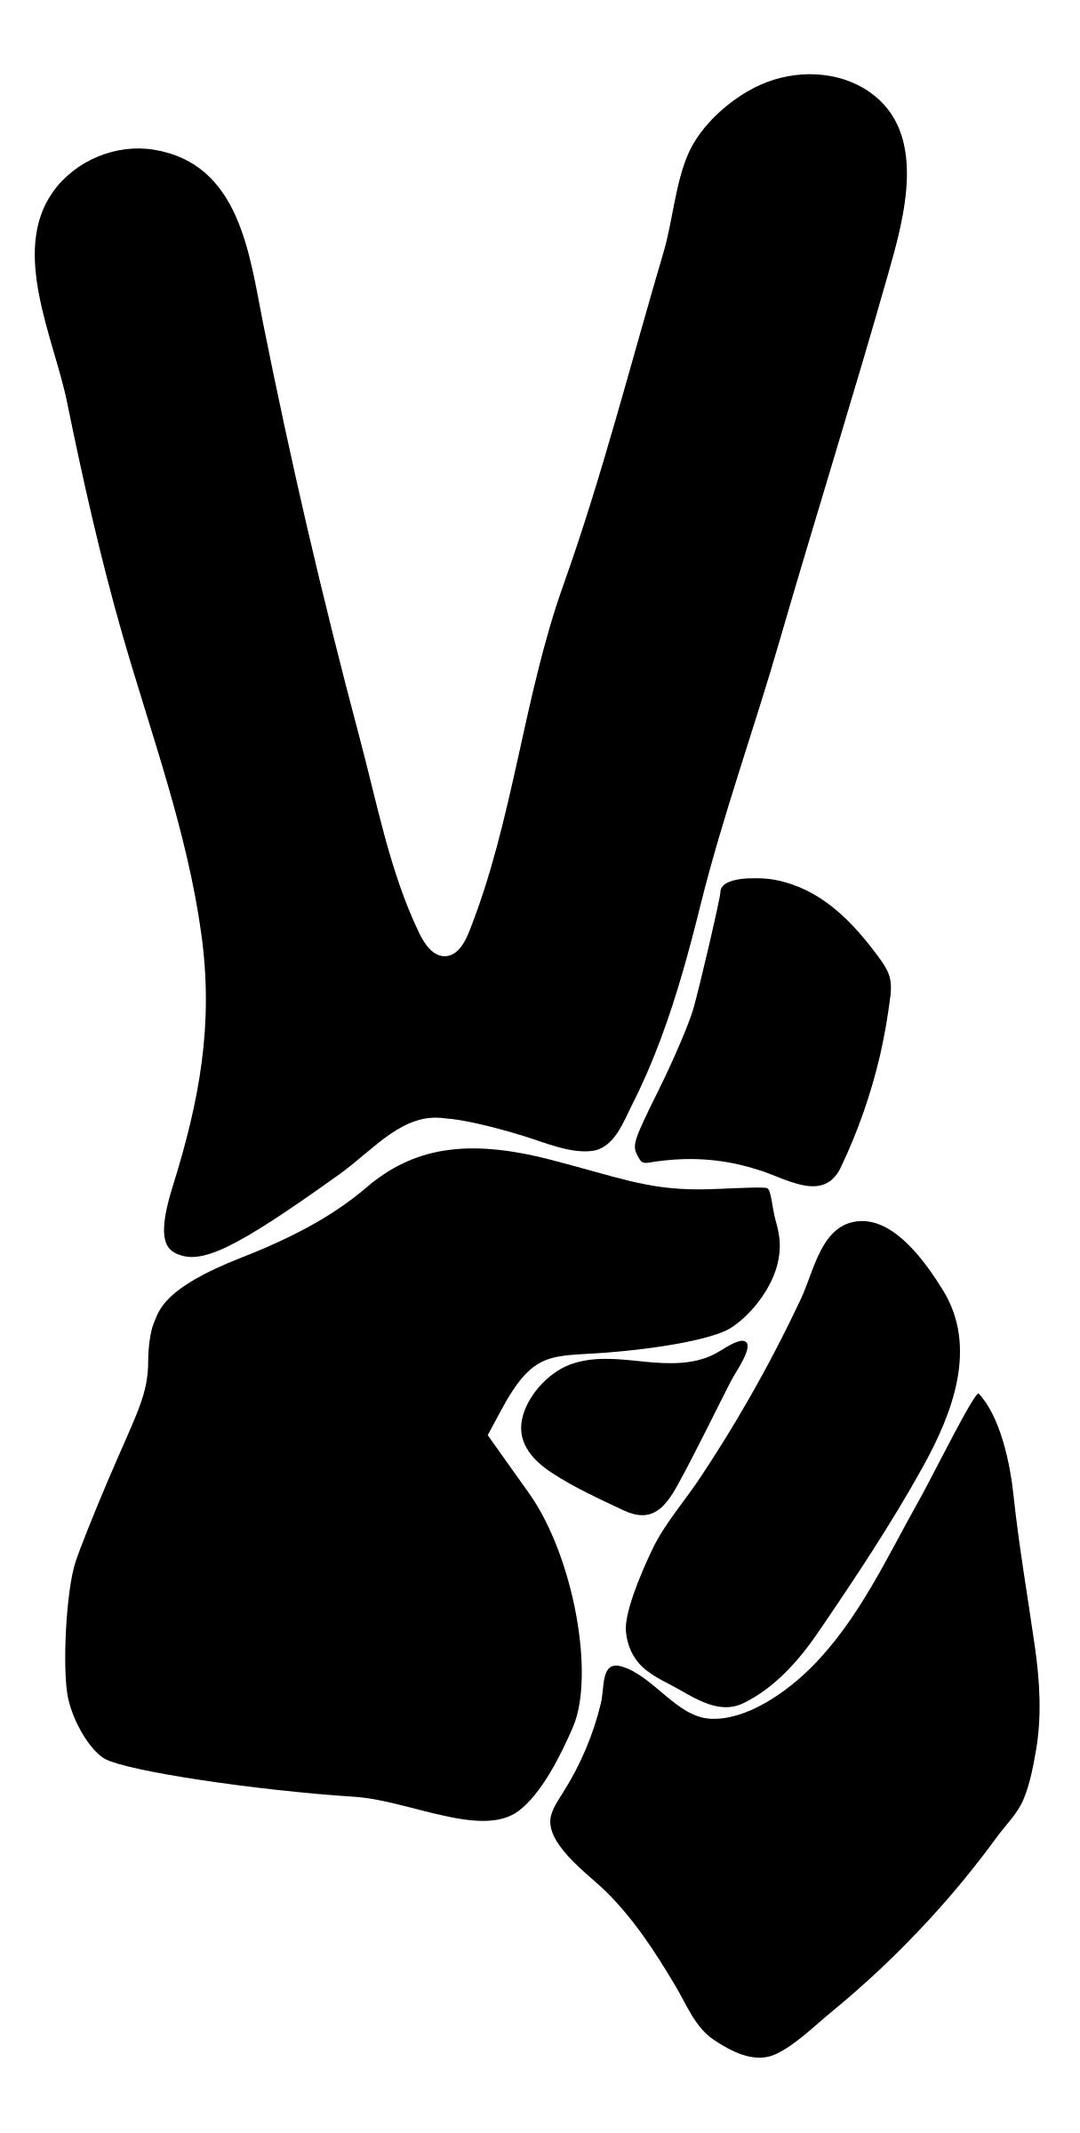 Peace Sign Silhouette Smoothed png transparent